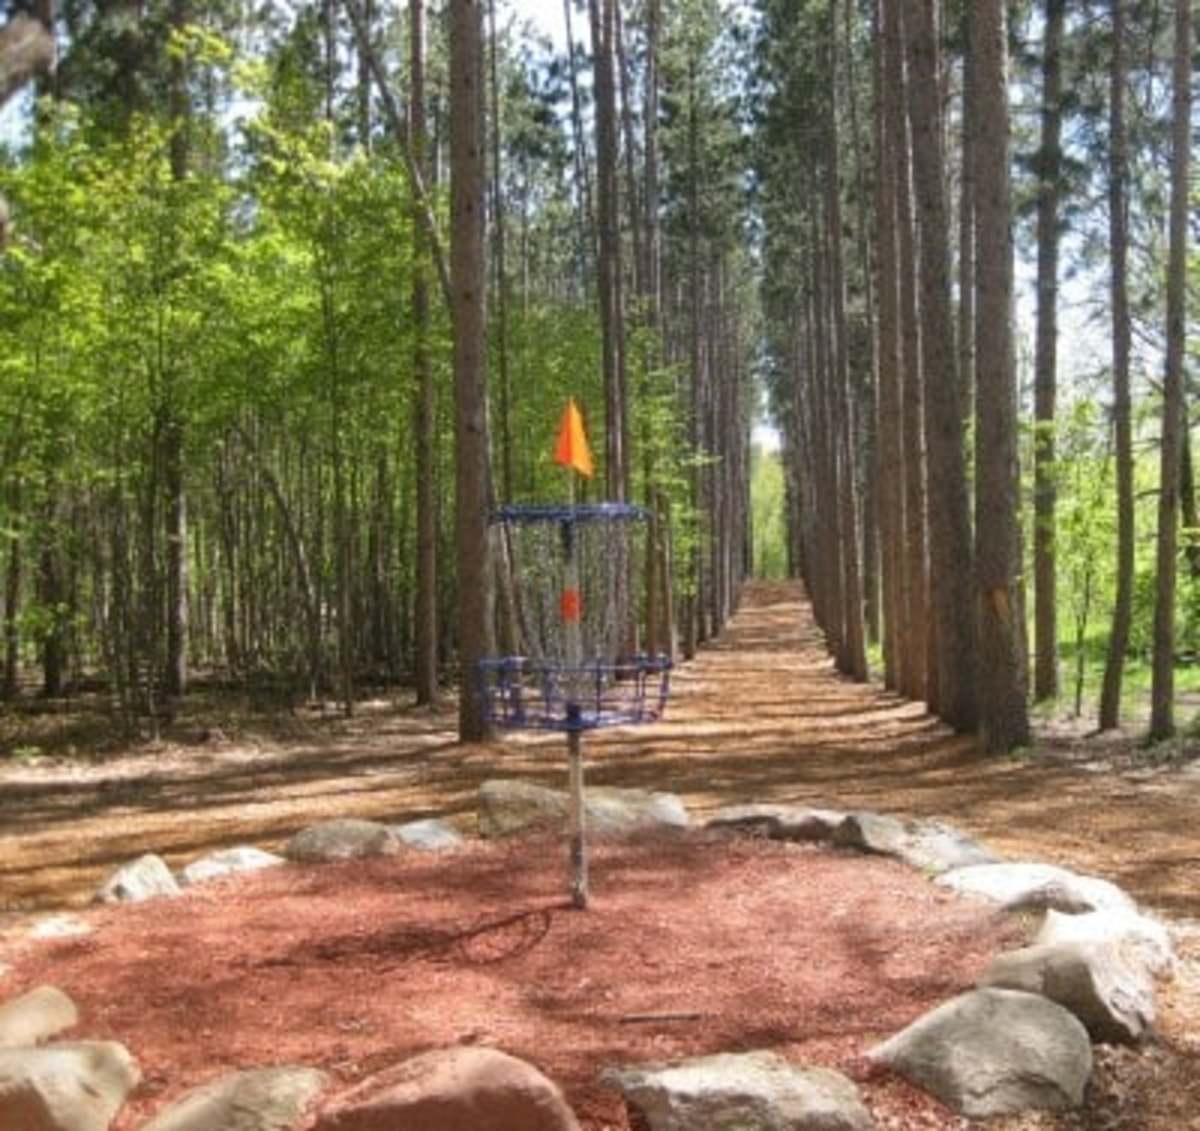 How to Buy the Best Practical Disc Golf Bag